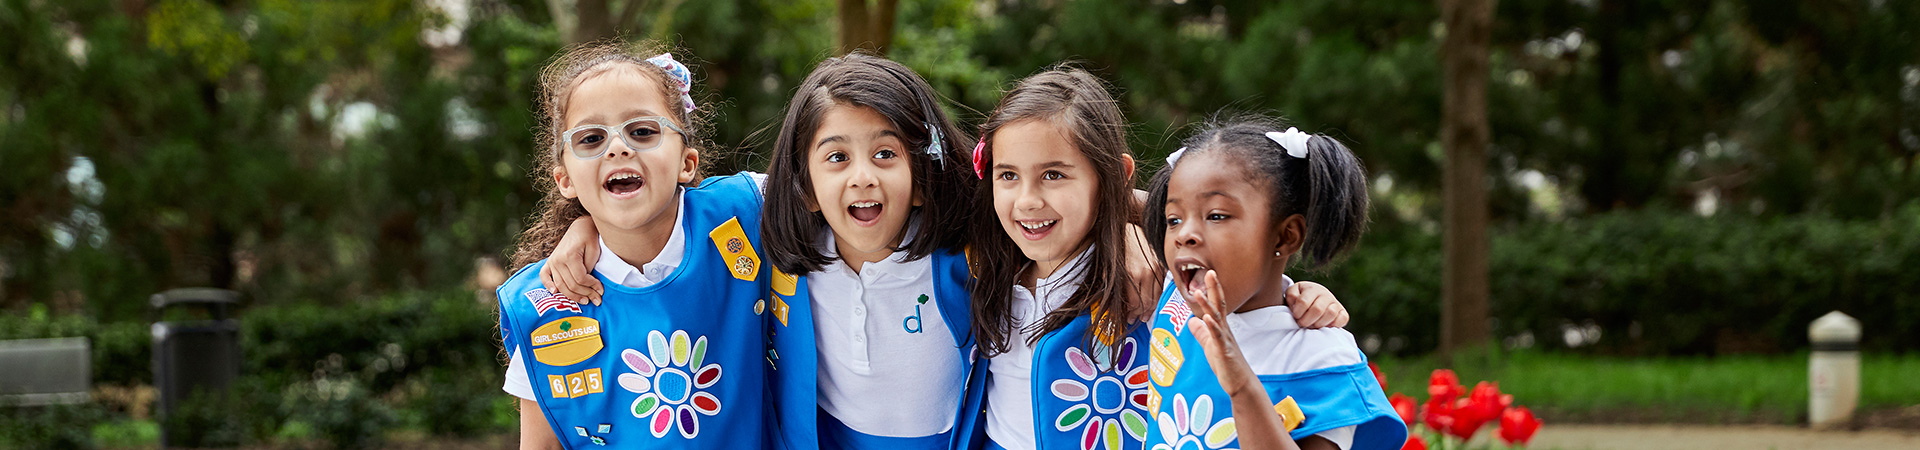  Group of kindergarten daisy girl scouts in vest and apron uniform hugging and smiling outside. 